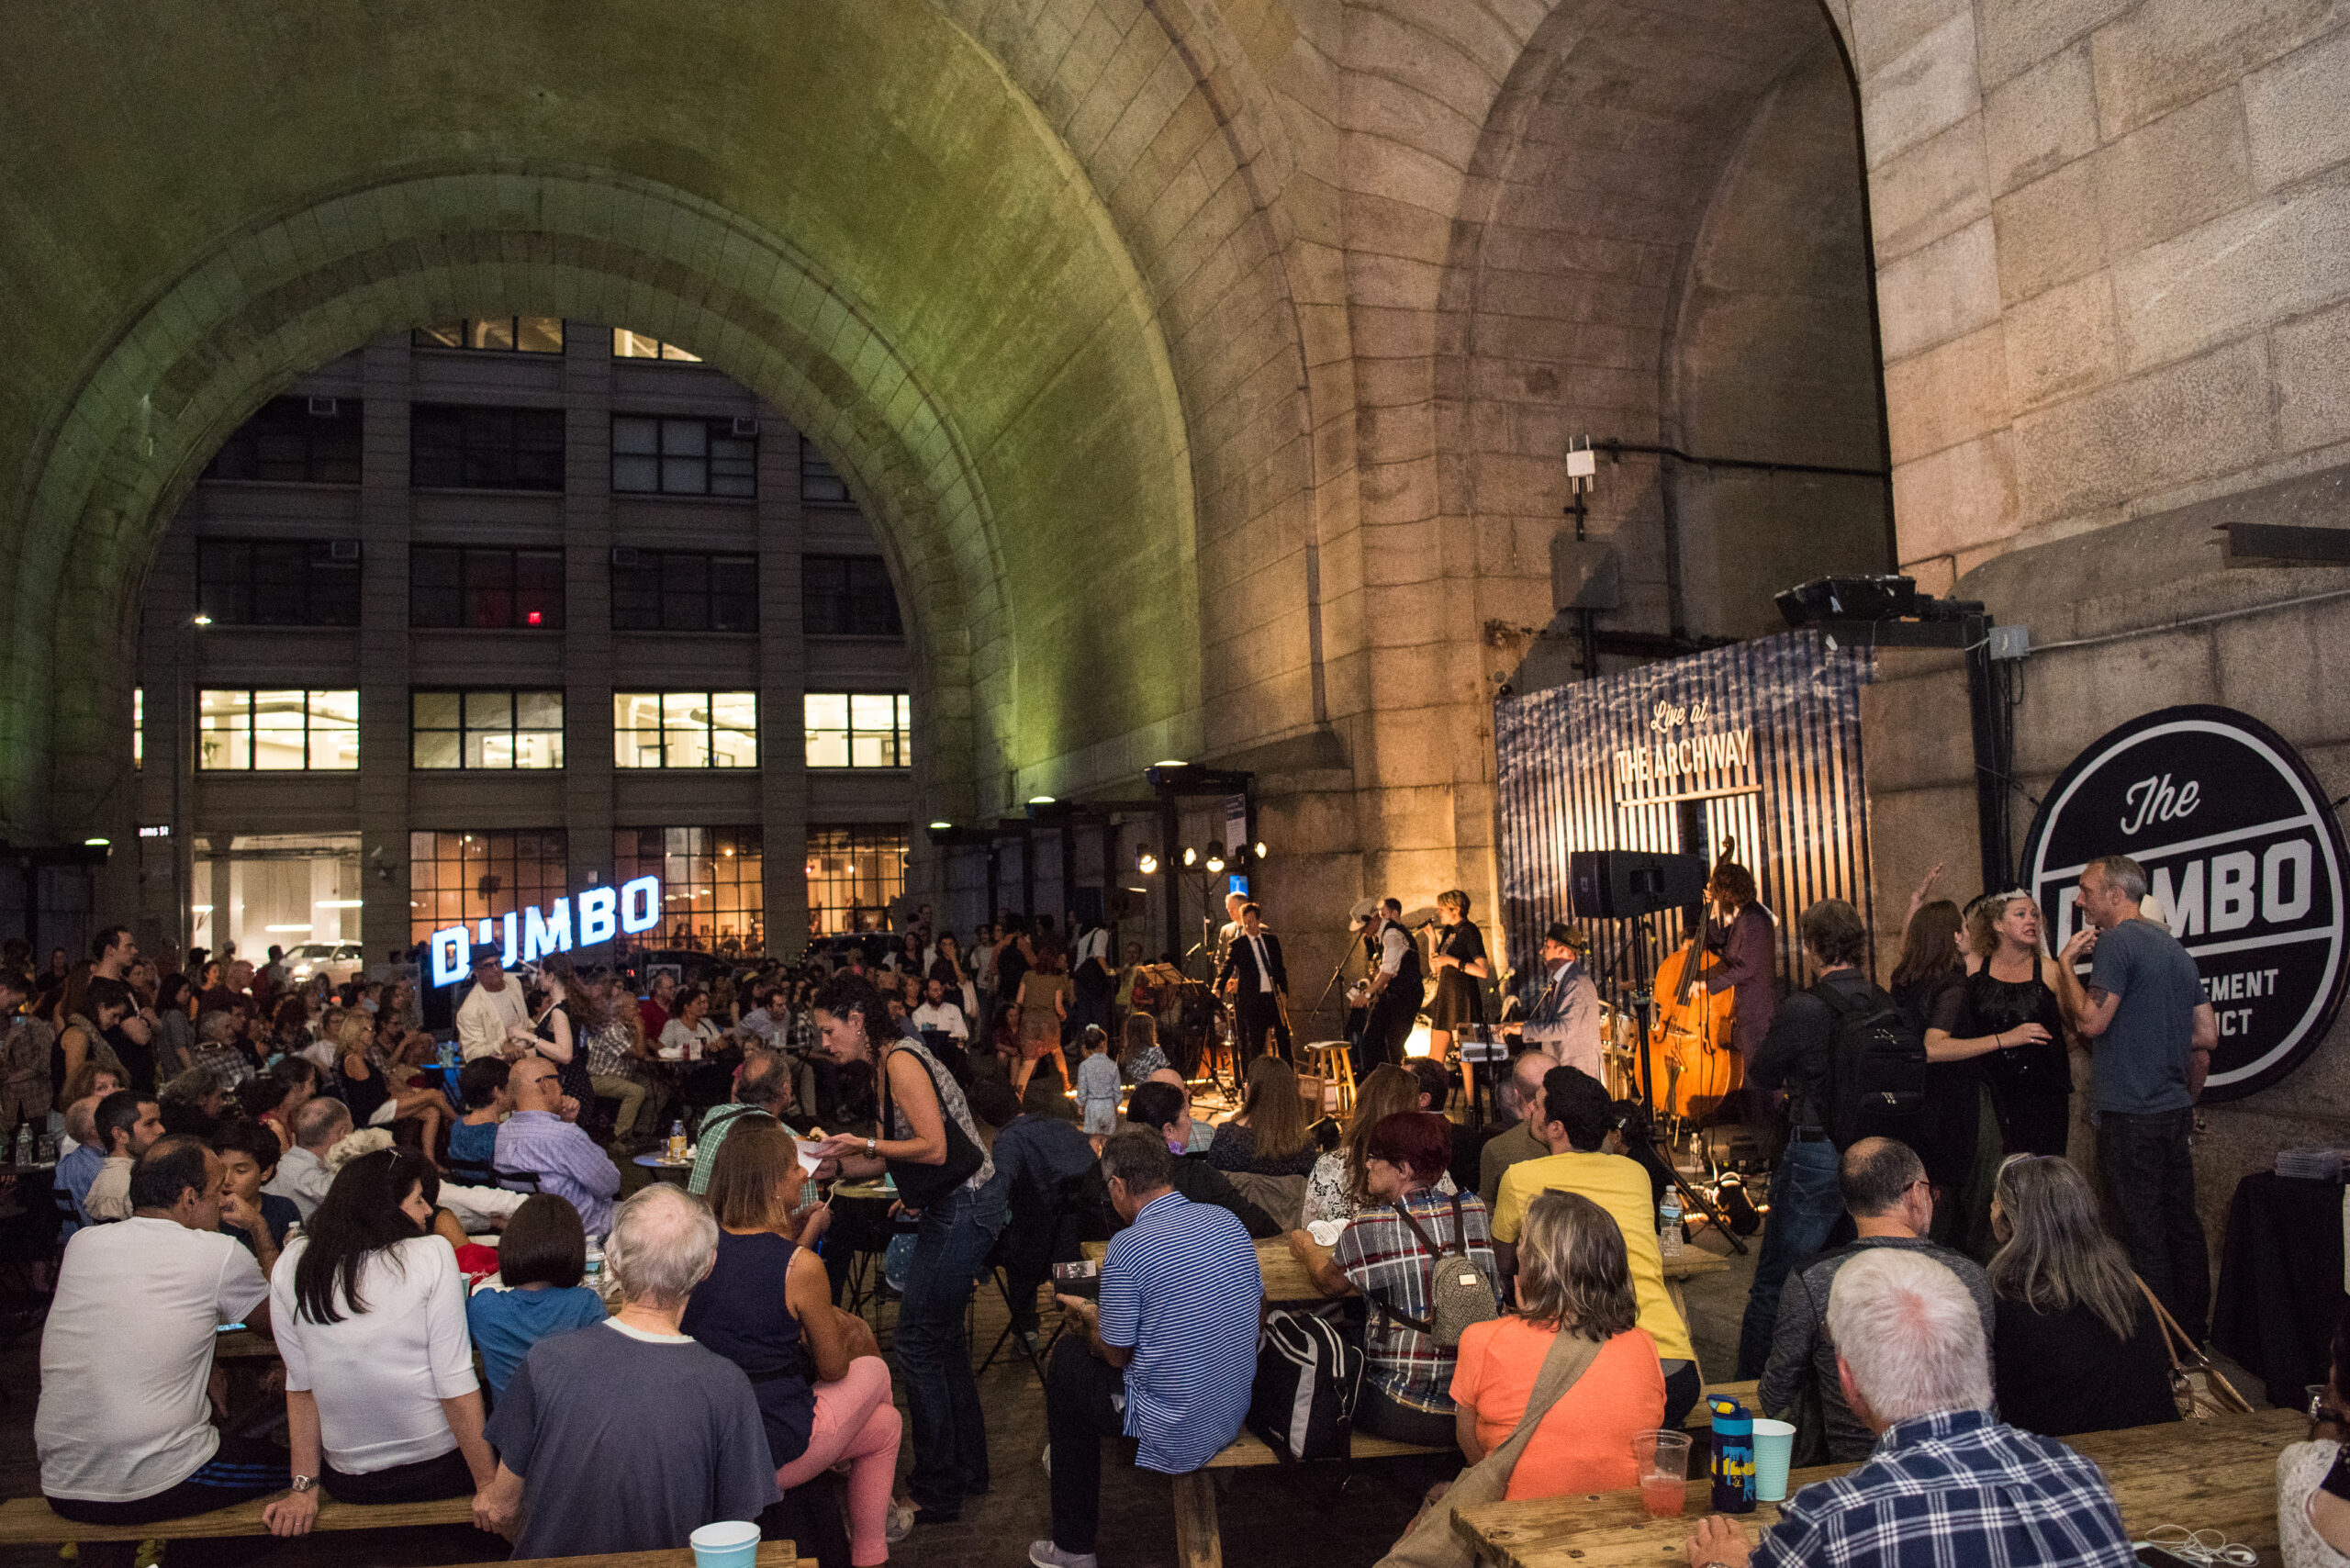 NYC DUMBO Improvement District - Small Business & Community - DUMBO Events - Live at the Archway Julienne Schaer 2017